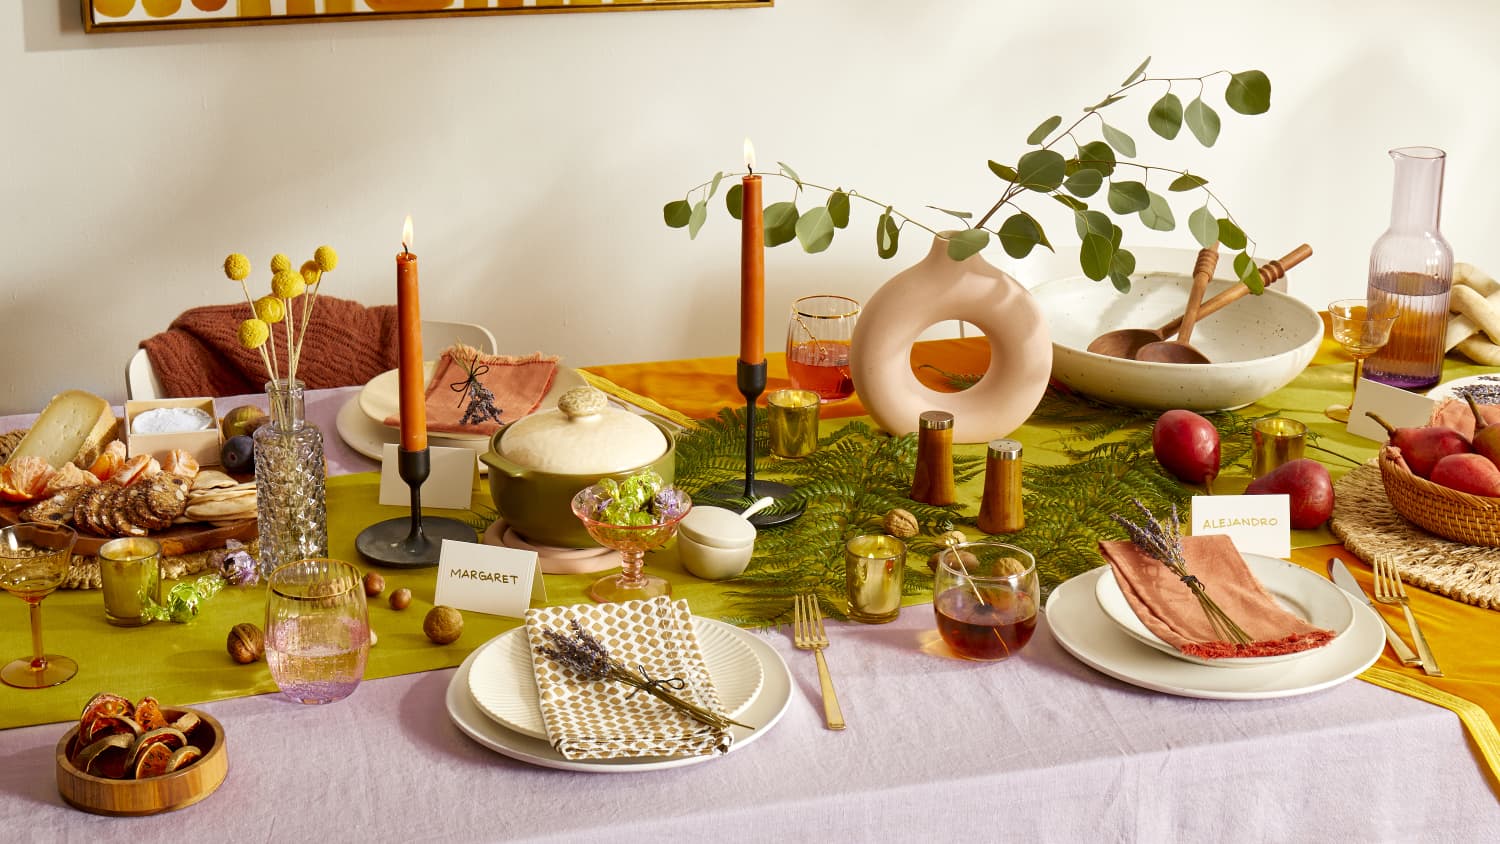 15 Thanksgiving Linen Ideas to Dress Up Your Table